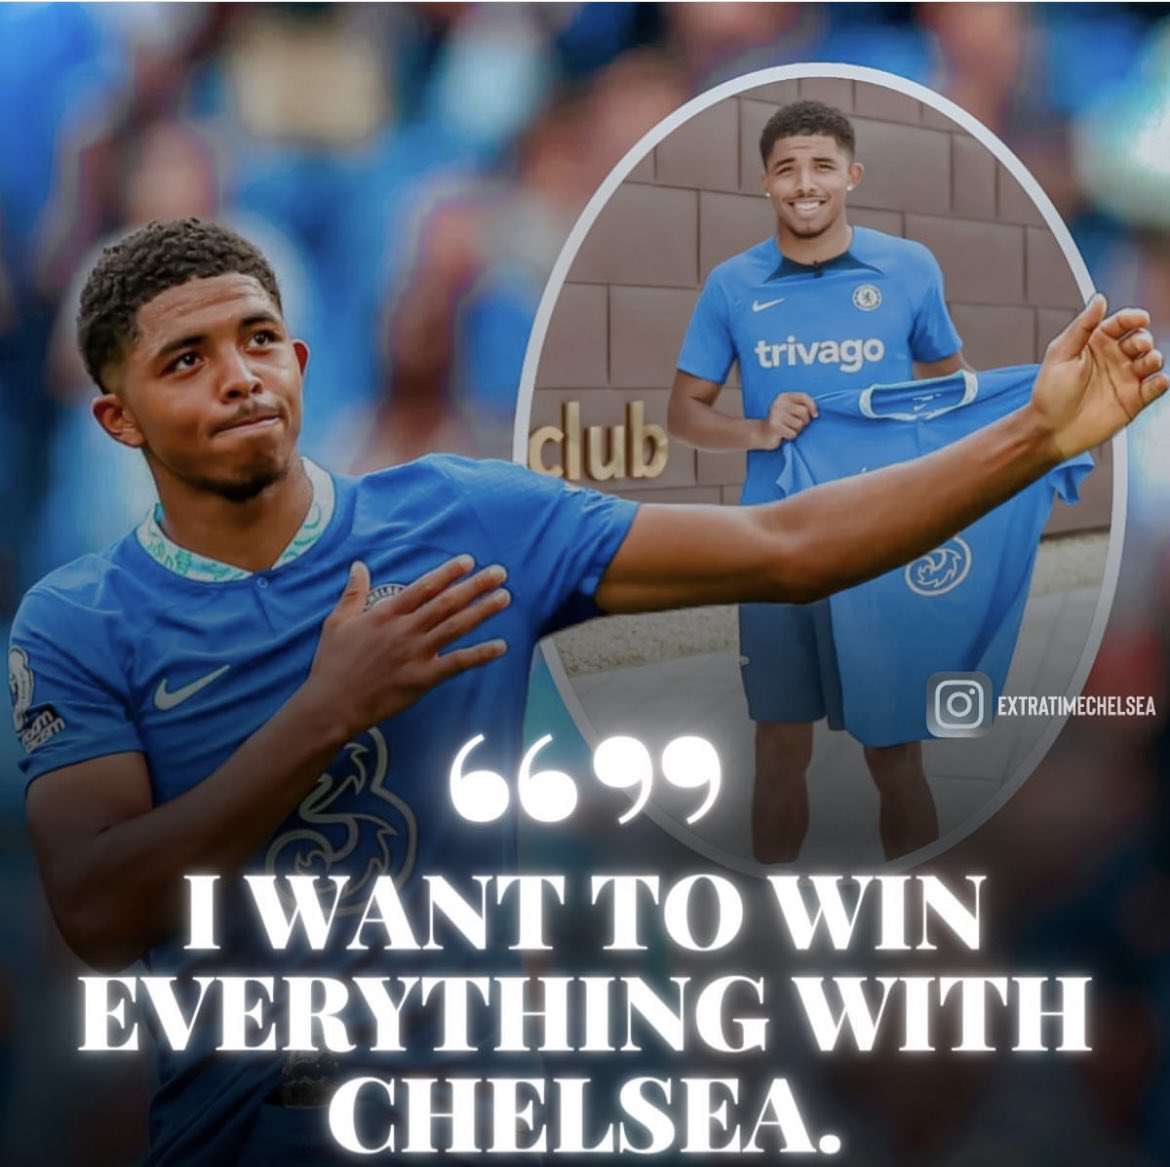 Wesley Fofana wants to win everything with Chelsea 💙